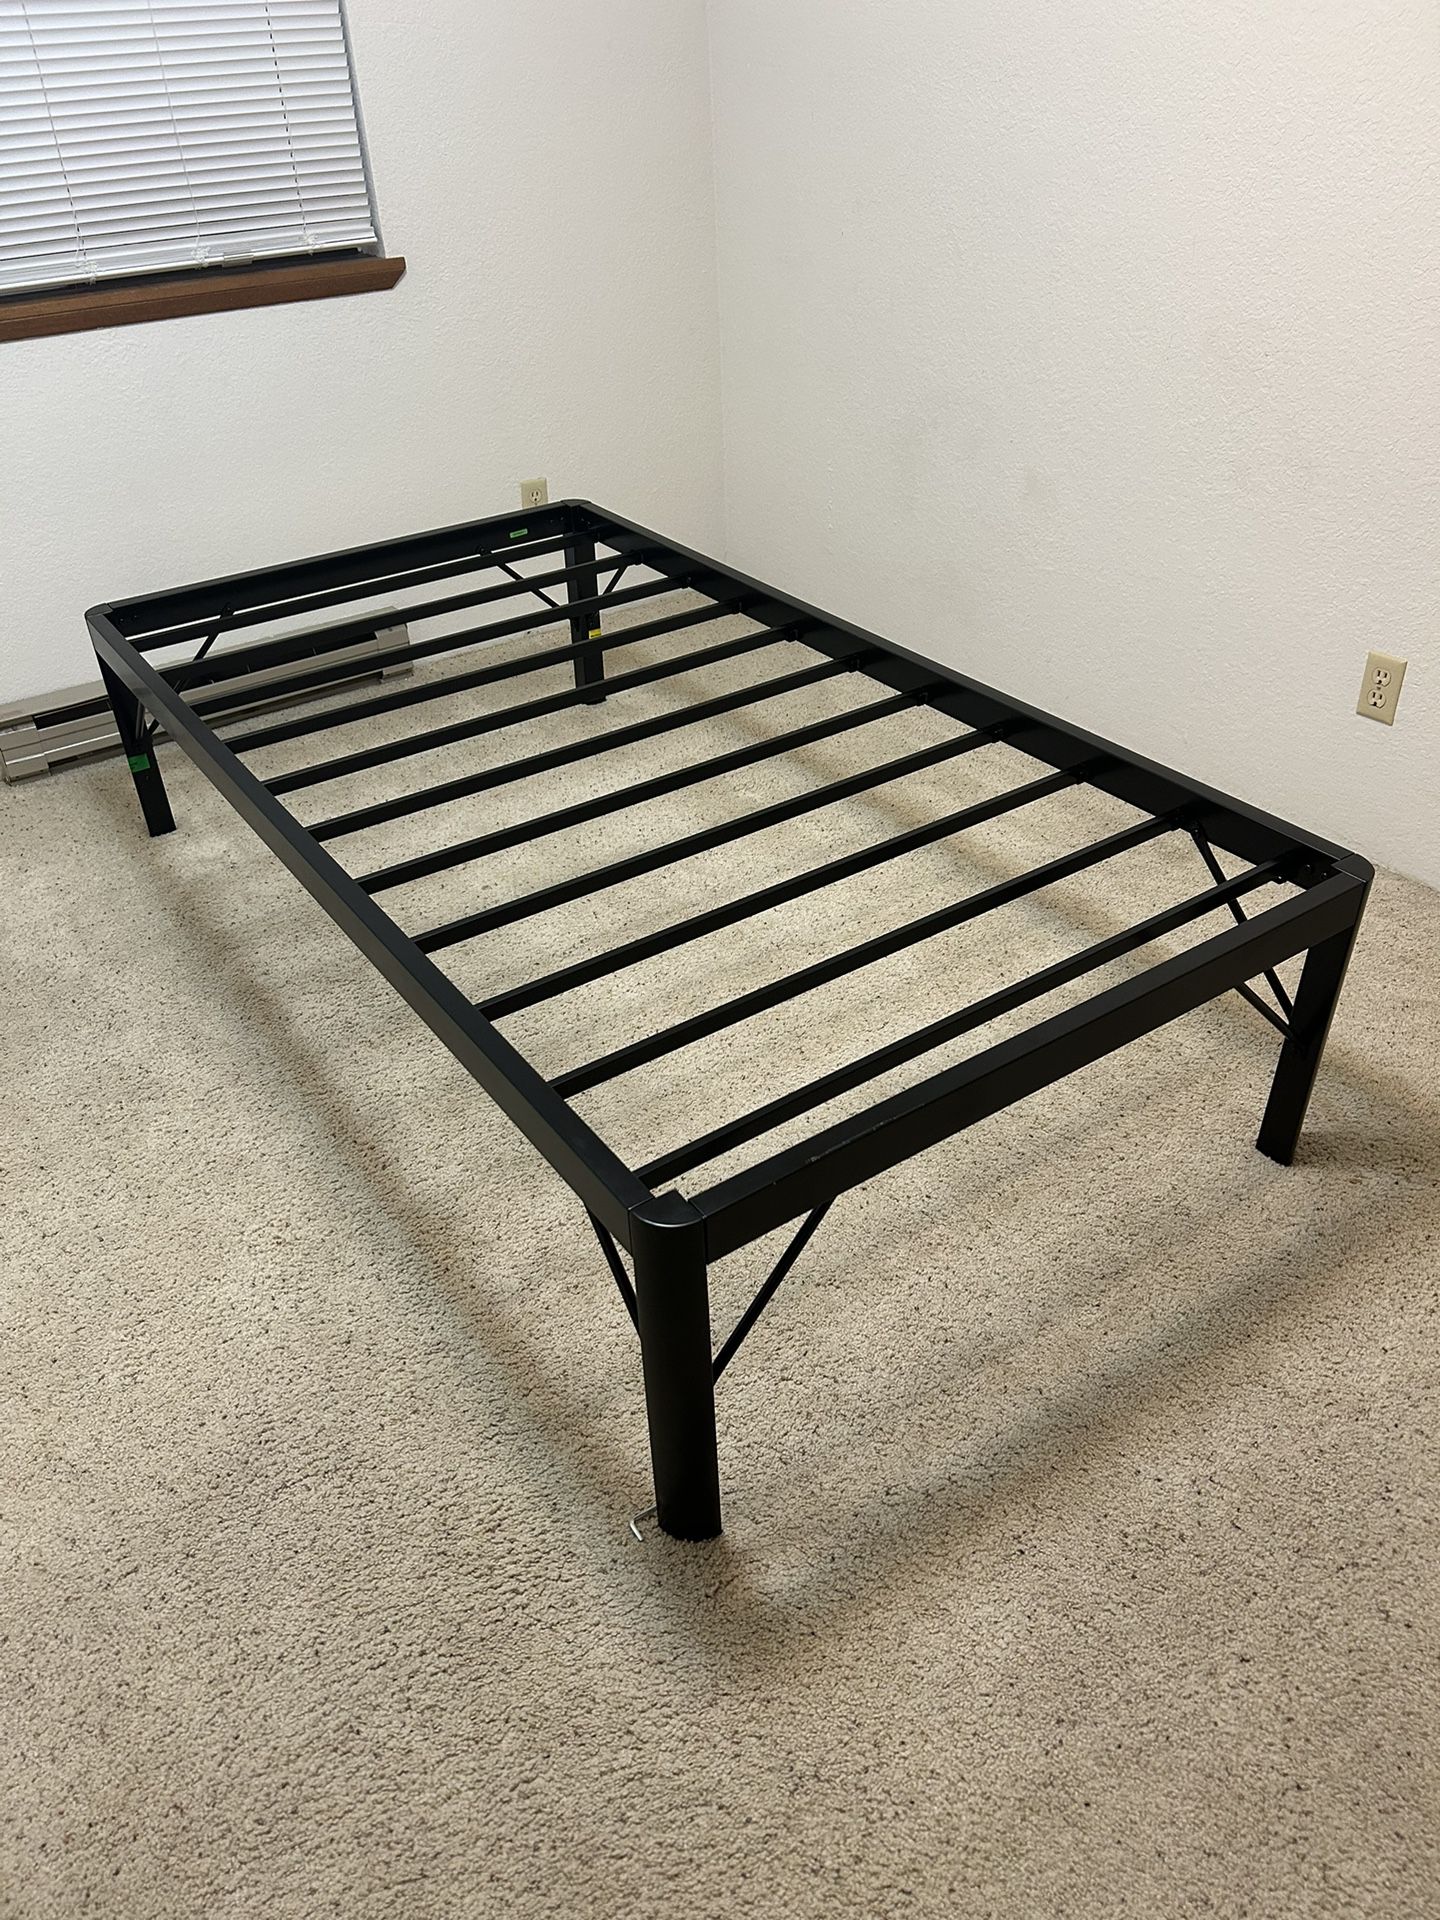 Metal Bed Frame - Twin Size